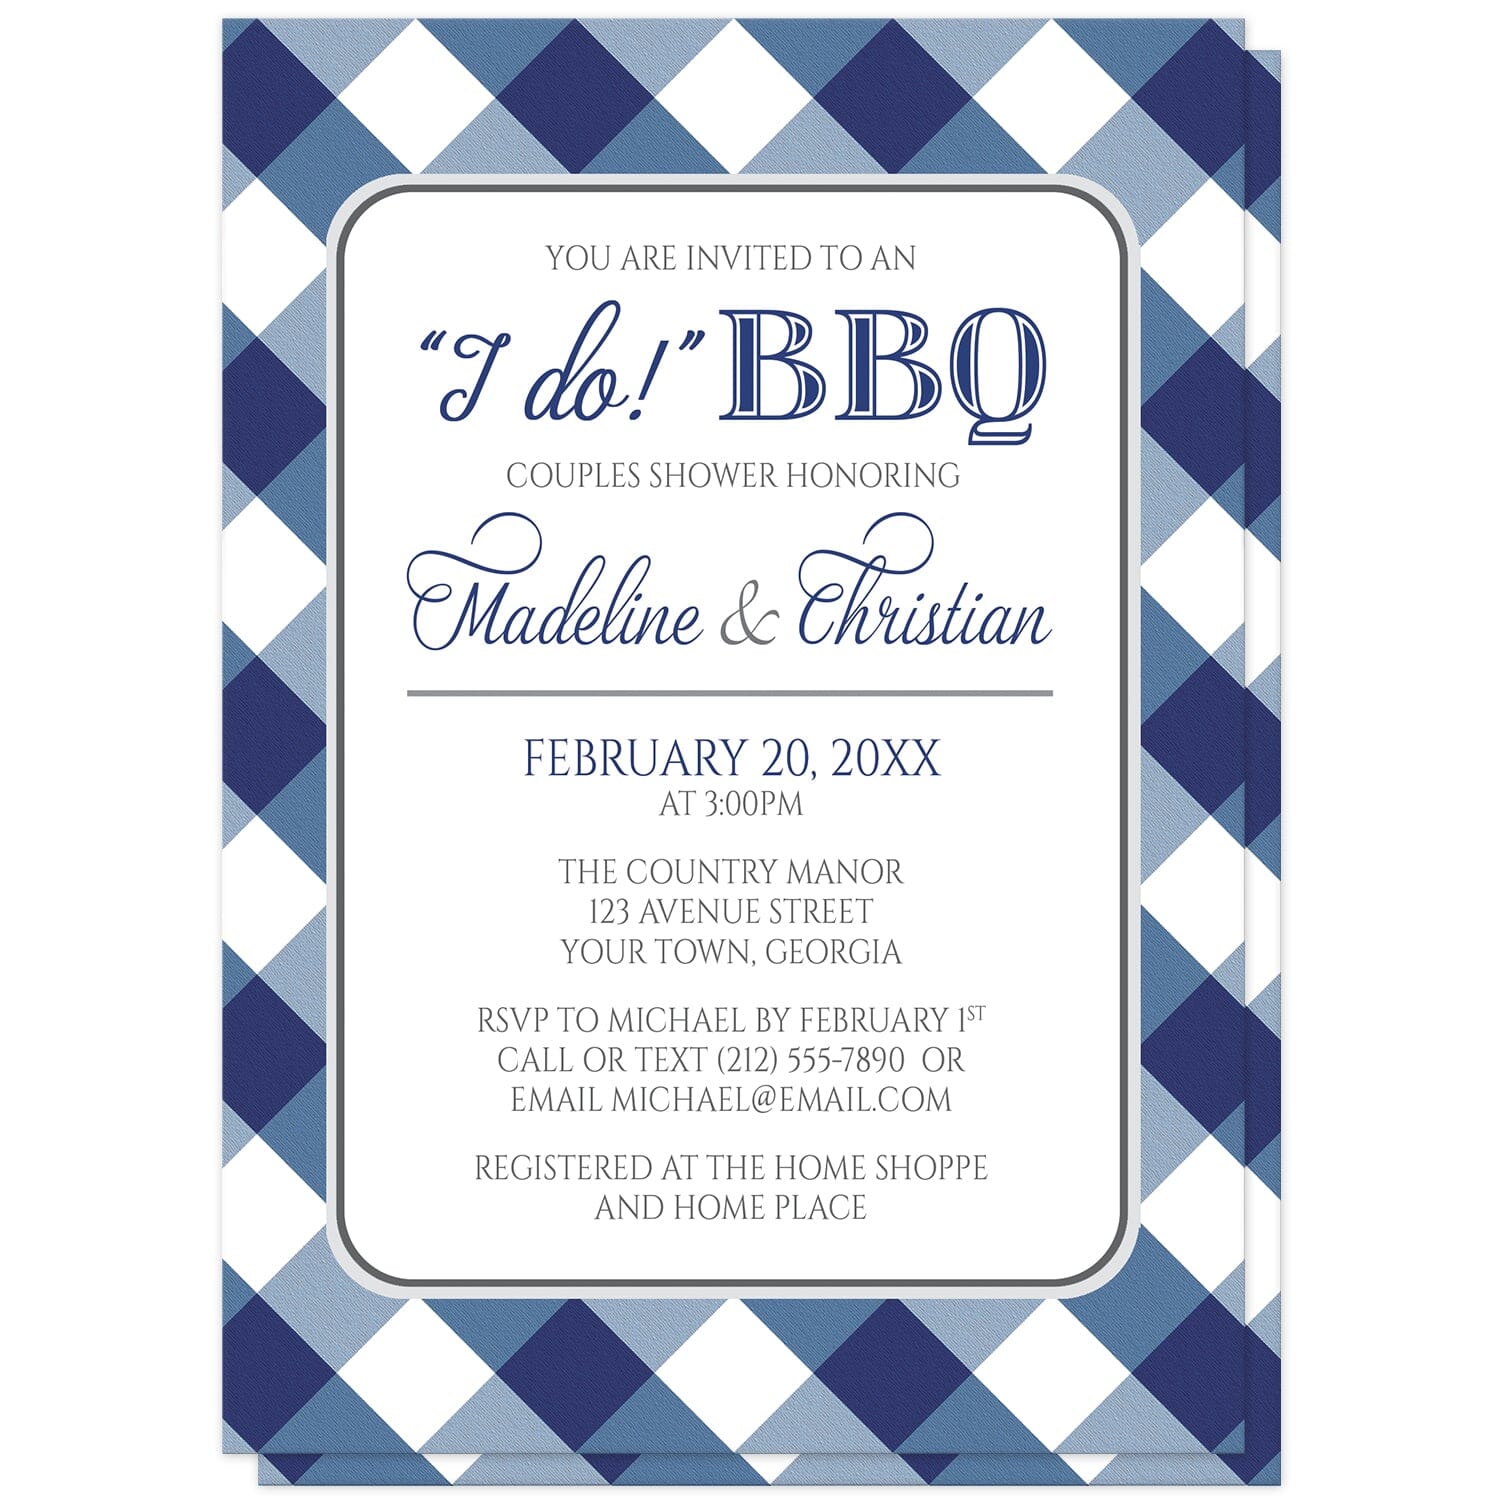 Navy Blue Gingham I Do BBQ Couples Shower Invitations at Artistically Invited. Navy blue gingham I Do BBQ couples shower invitations with your celebration details in navy blue and gray, in a white rounded corners frame, over a diagonal navy blue and white gingham pattern background.